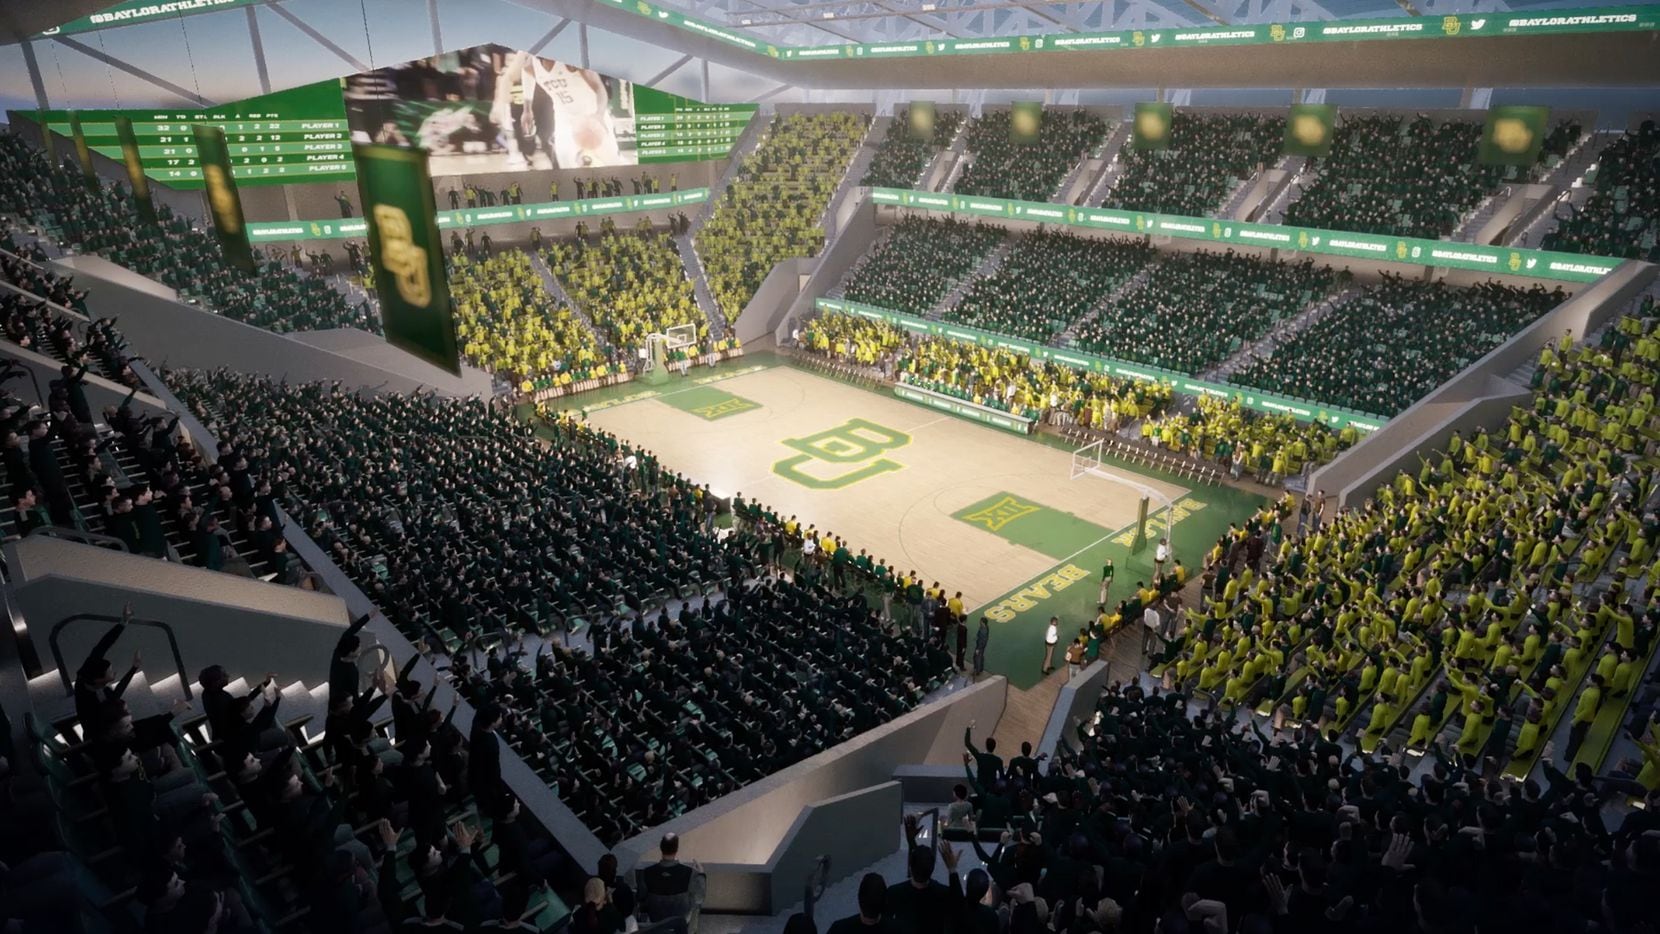 Rendering of Baylor's new basketball arena.